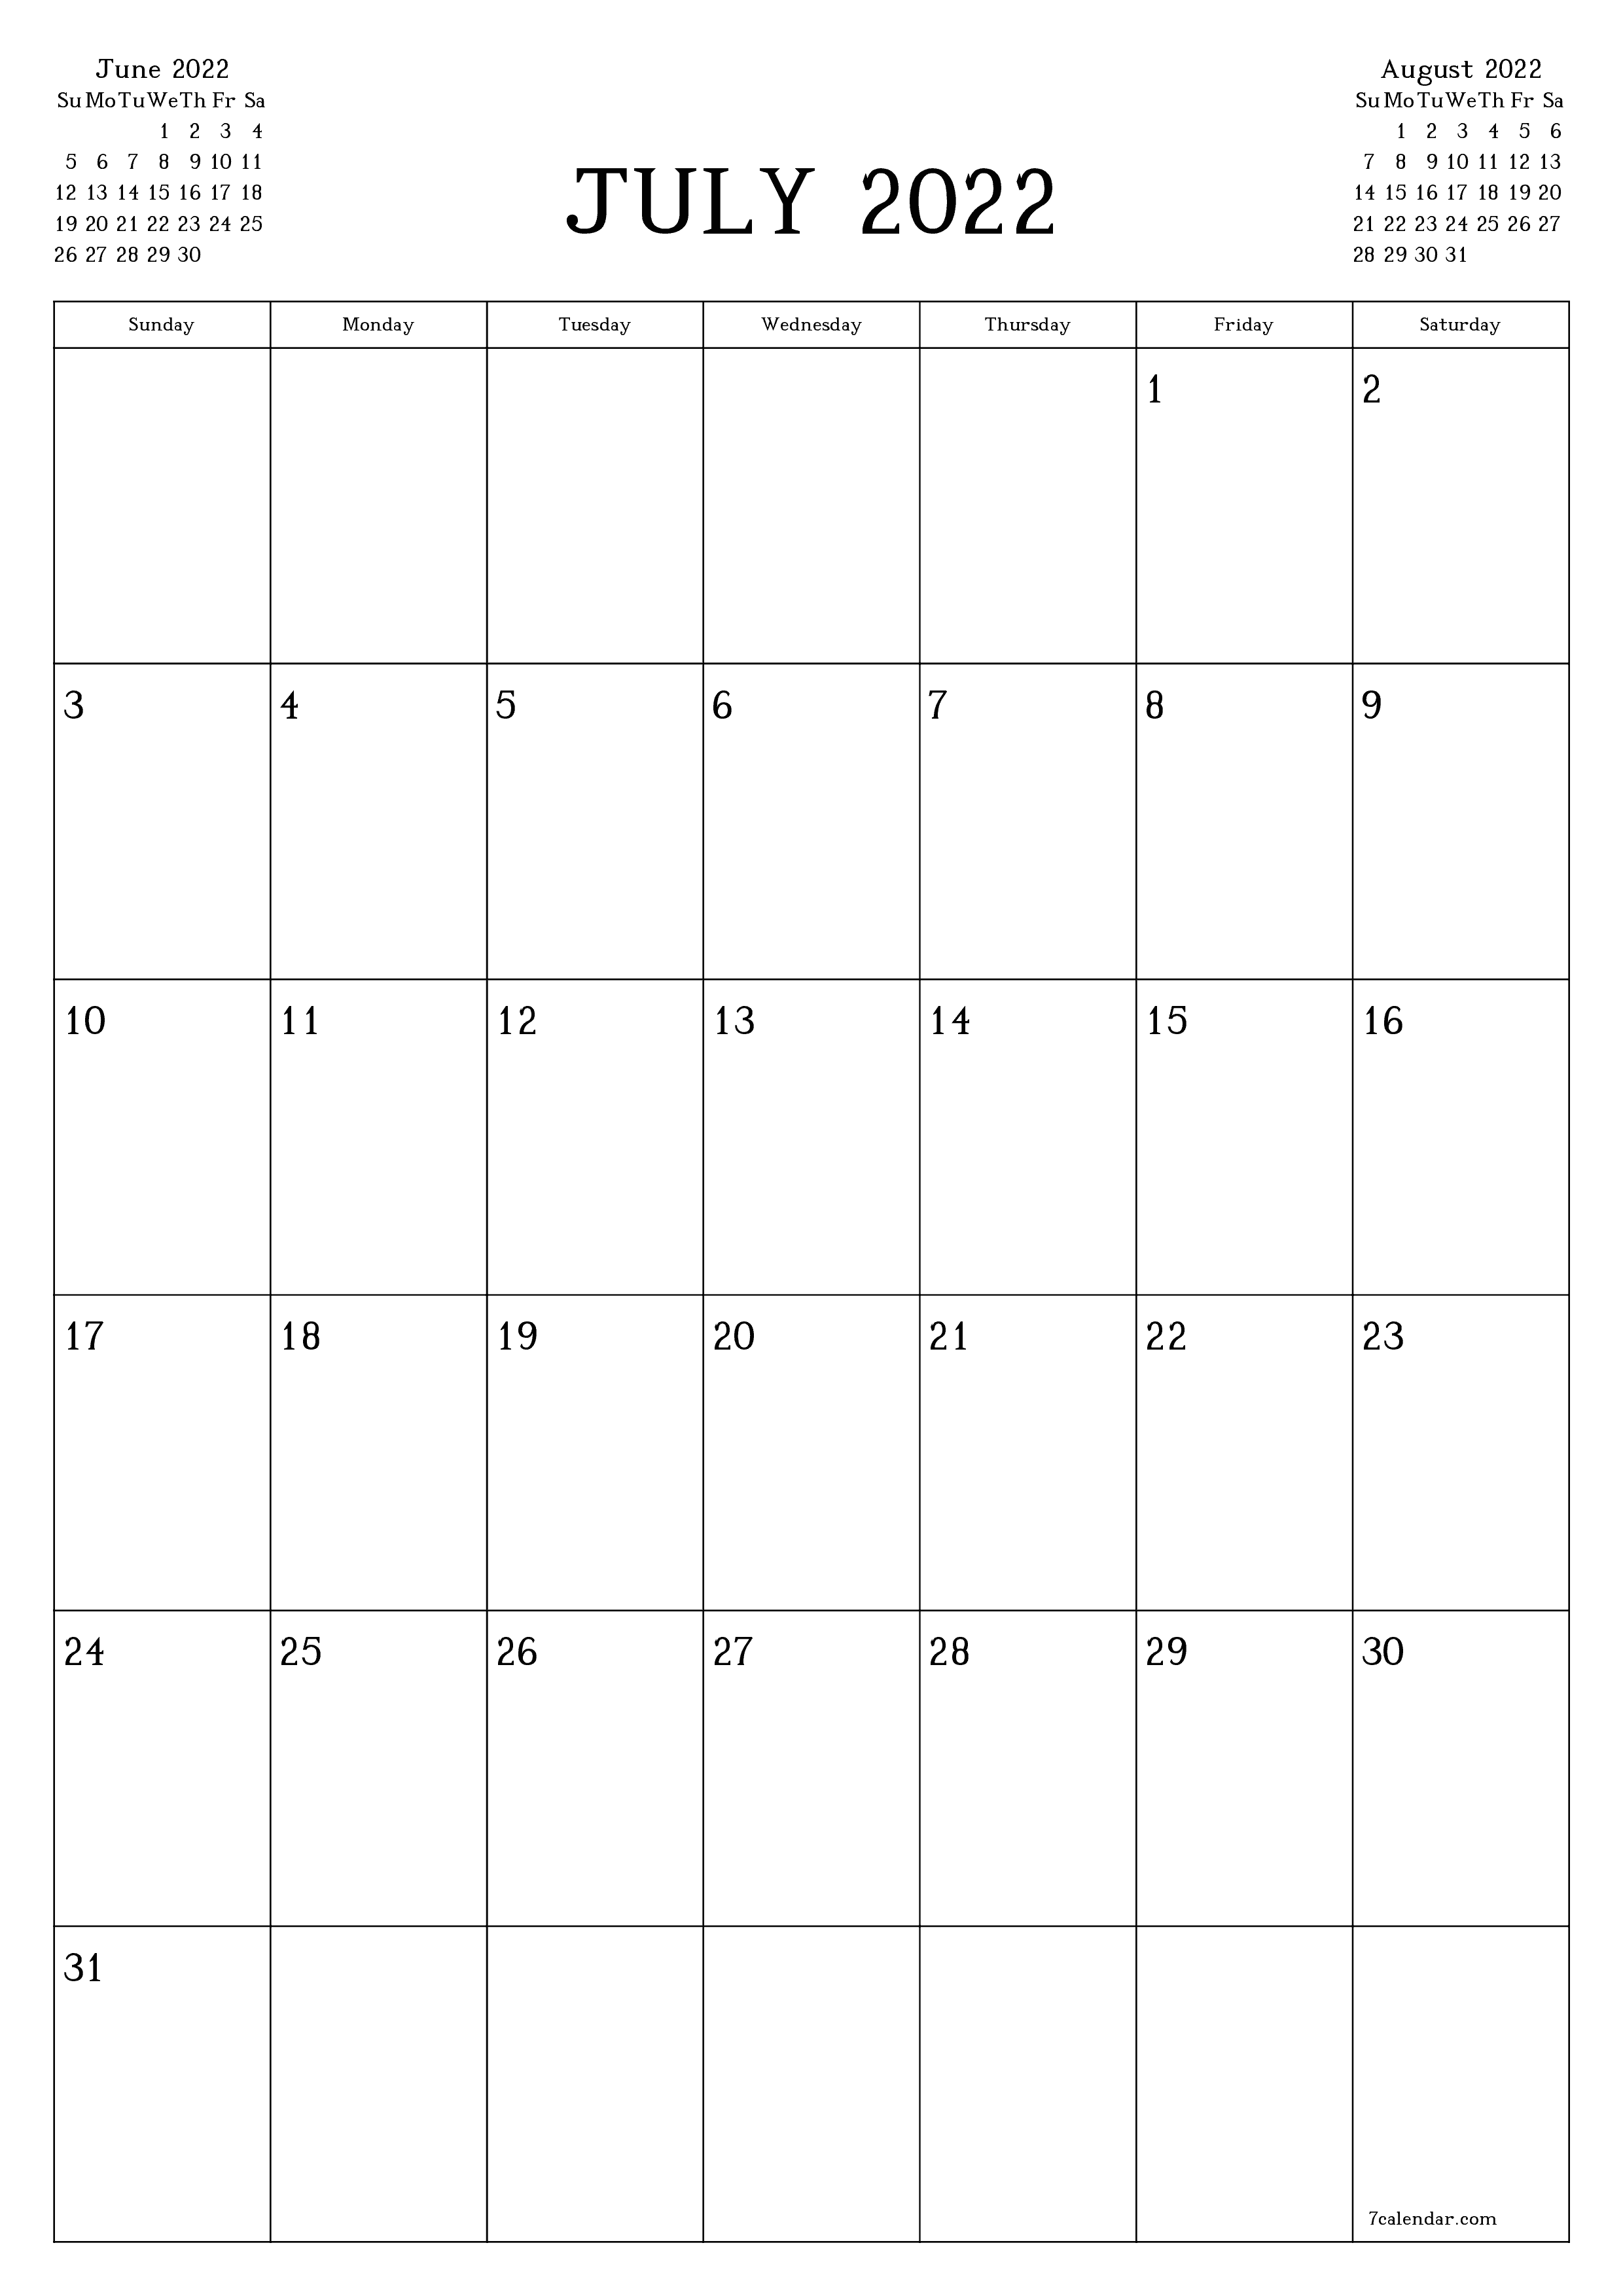 Blank monthly calendar planner for month July 2022 with notes save and print to PDF PNG English - 7calendar.com